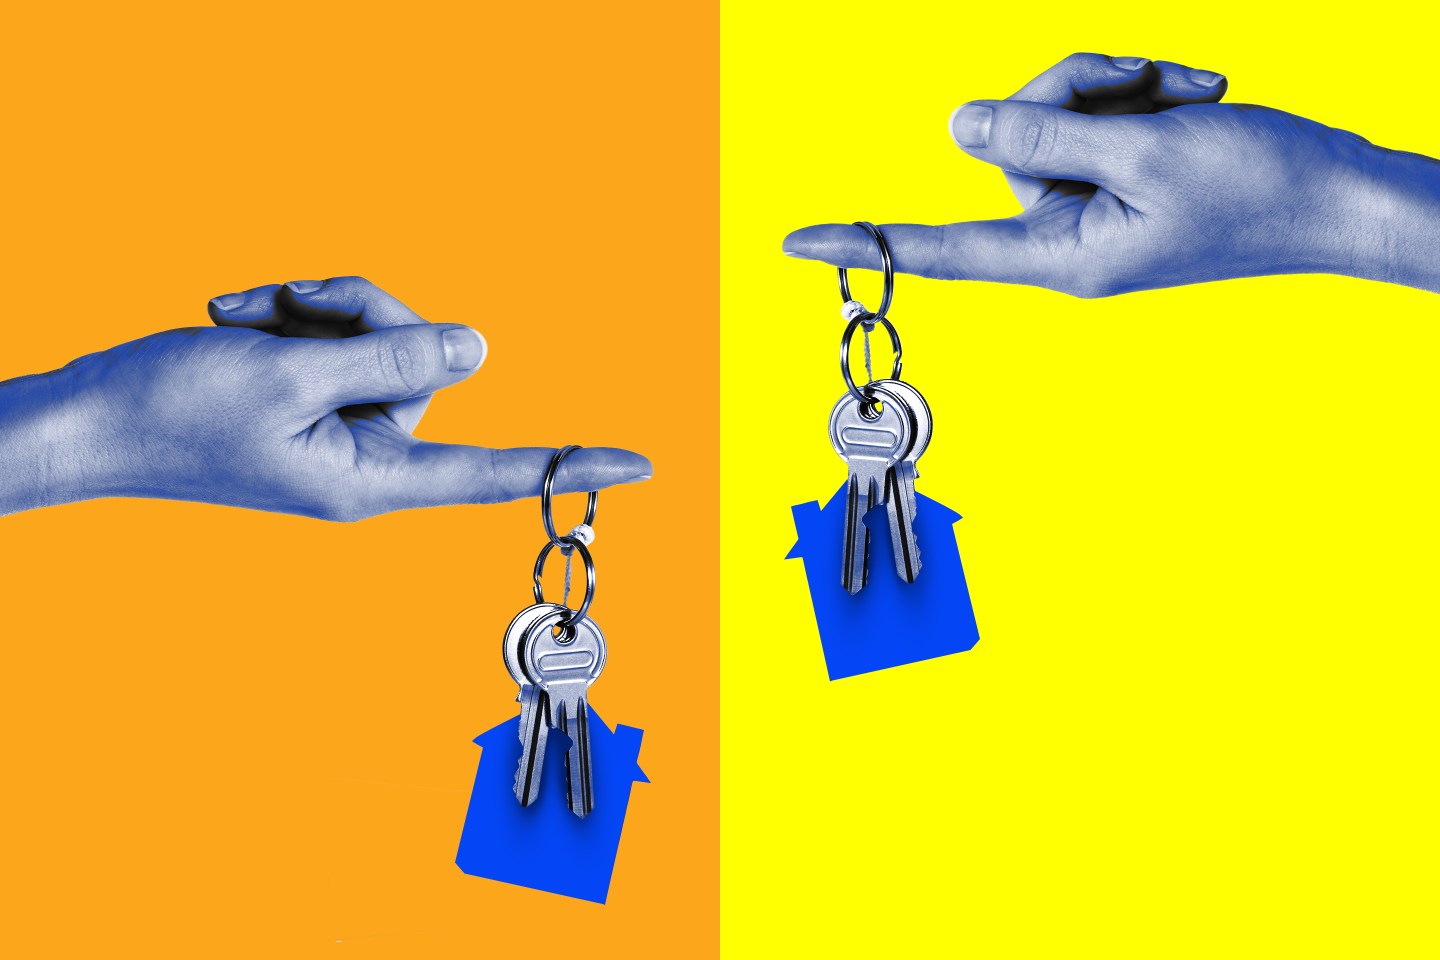 Photo illustration of two hands with a set of house keys being held by the index finger, one over an orange background and the other over yellow.